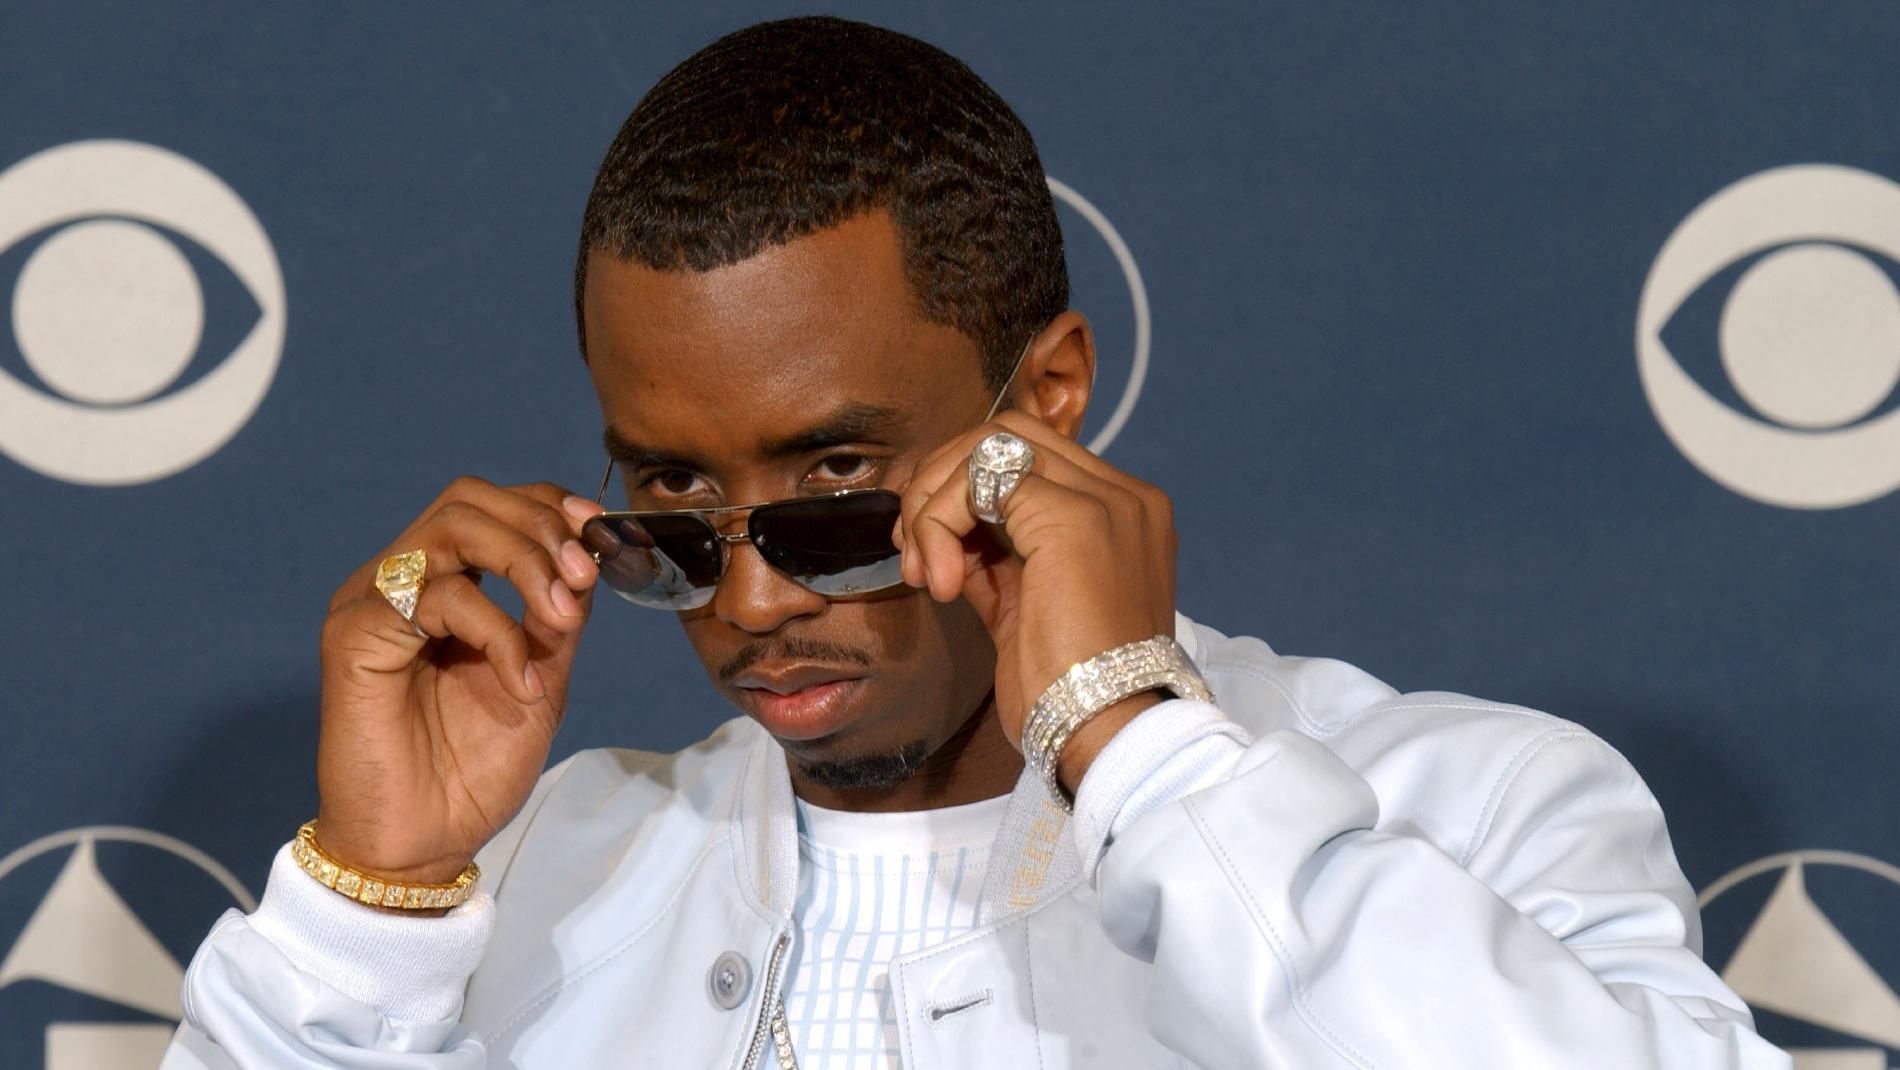 Puff Daddy wants you to start calling him Puff Daddy - The Strut